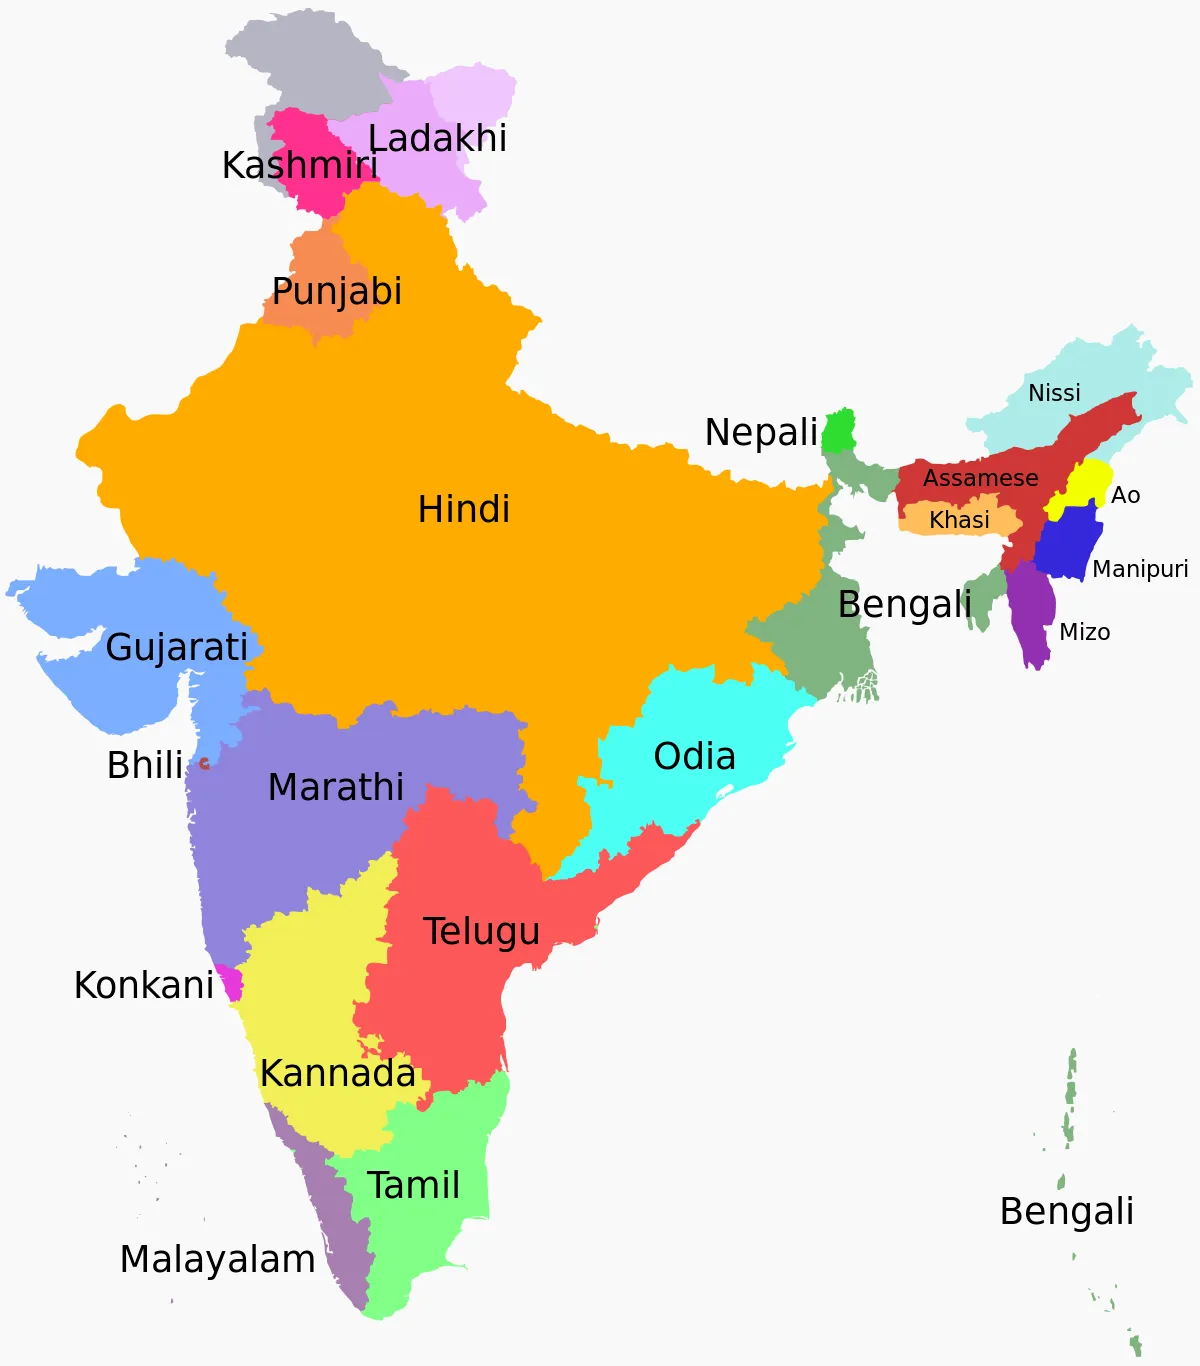 Importance of Regional Language in India